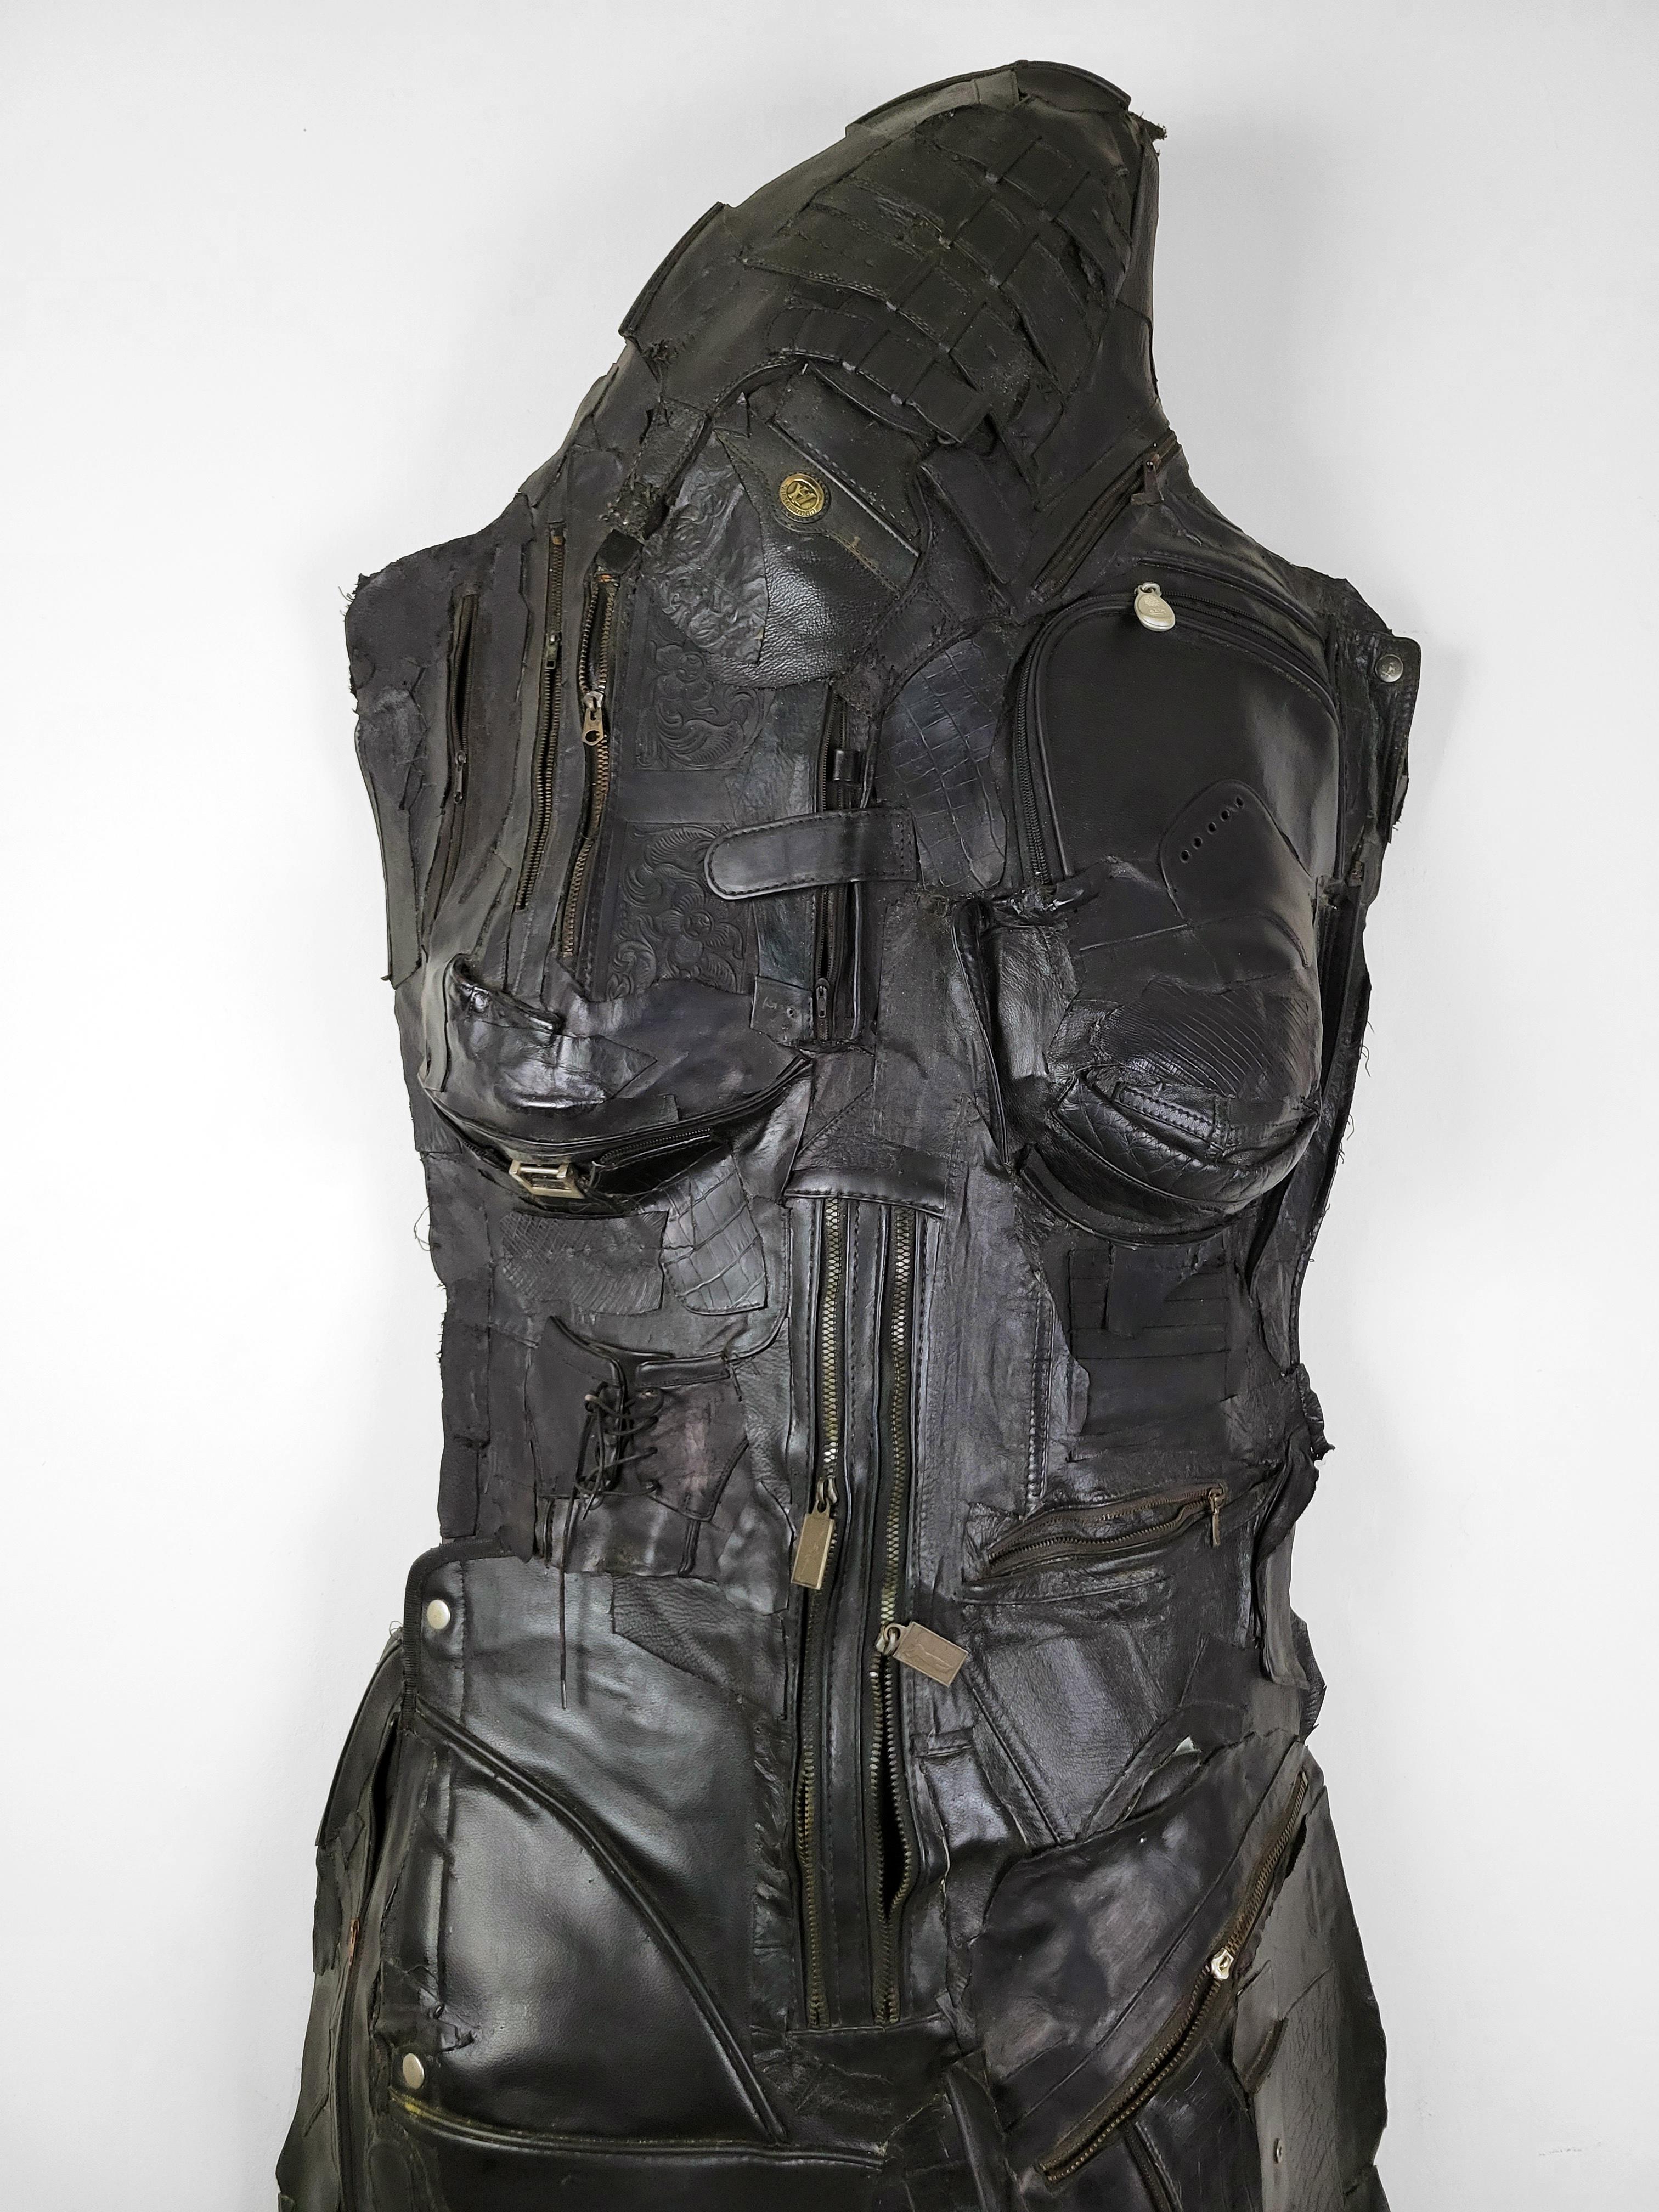 Linda Stein, Guardian 697 - Feminist Contemporary Black Leather Metal Figurative Wall Sculpture 

Guardian 697 from Linda Stein’s Knights of Protection series functions both as a defender in battle and a symbol of pacifism.  The series references